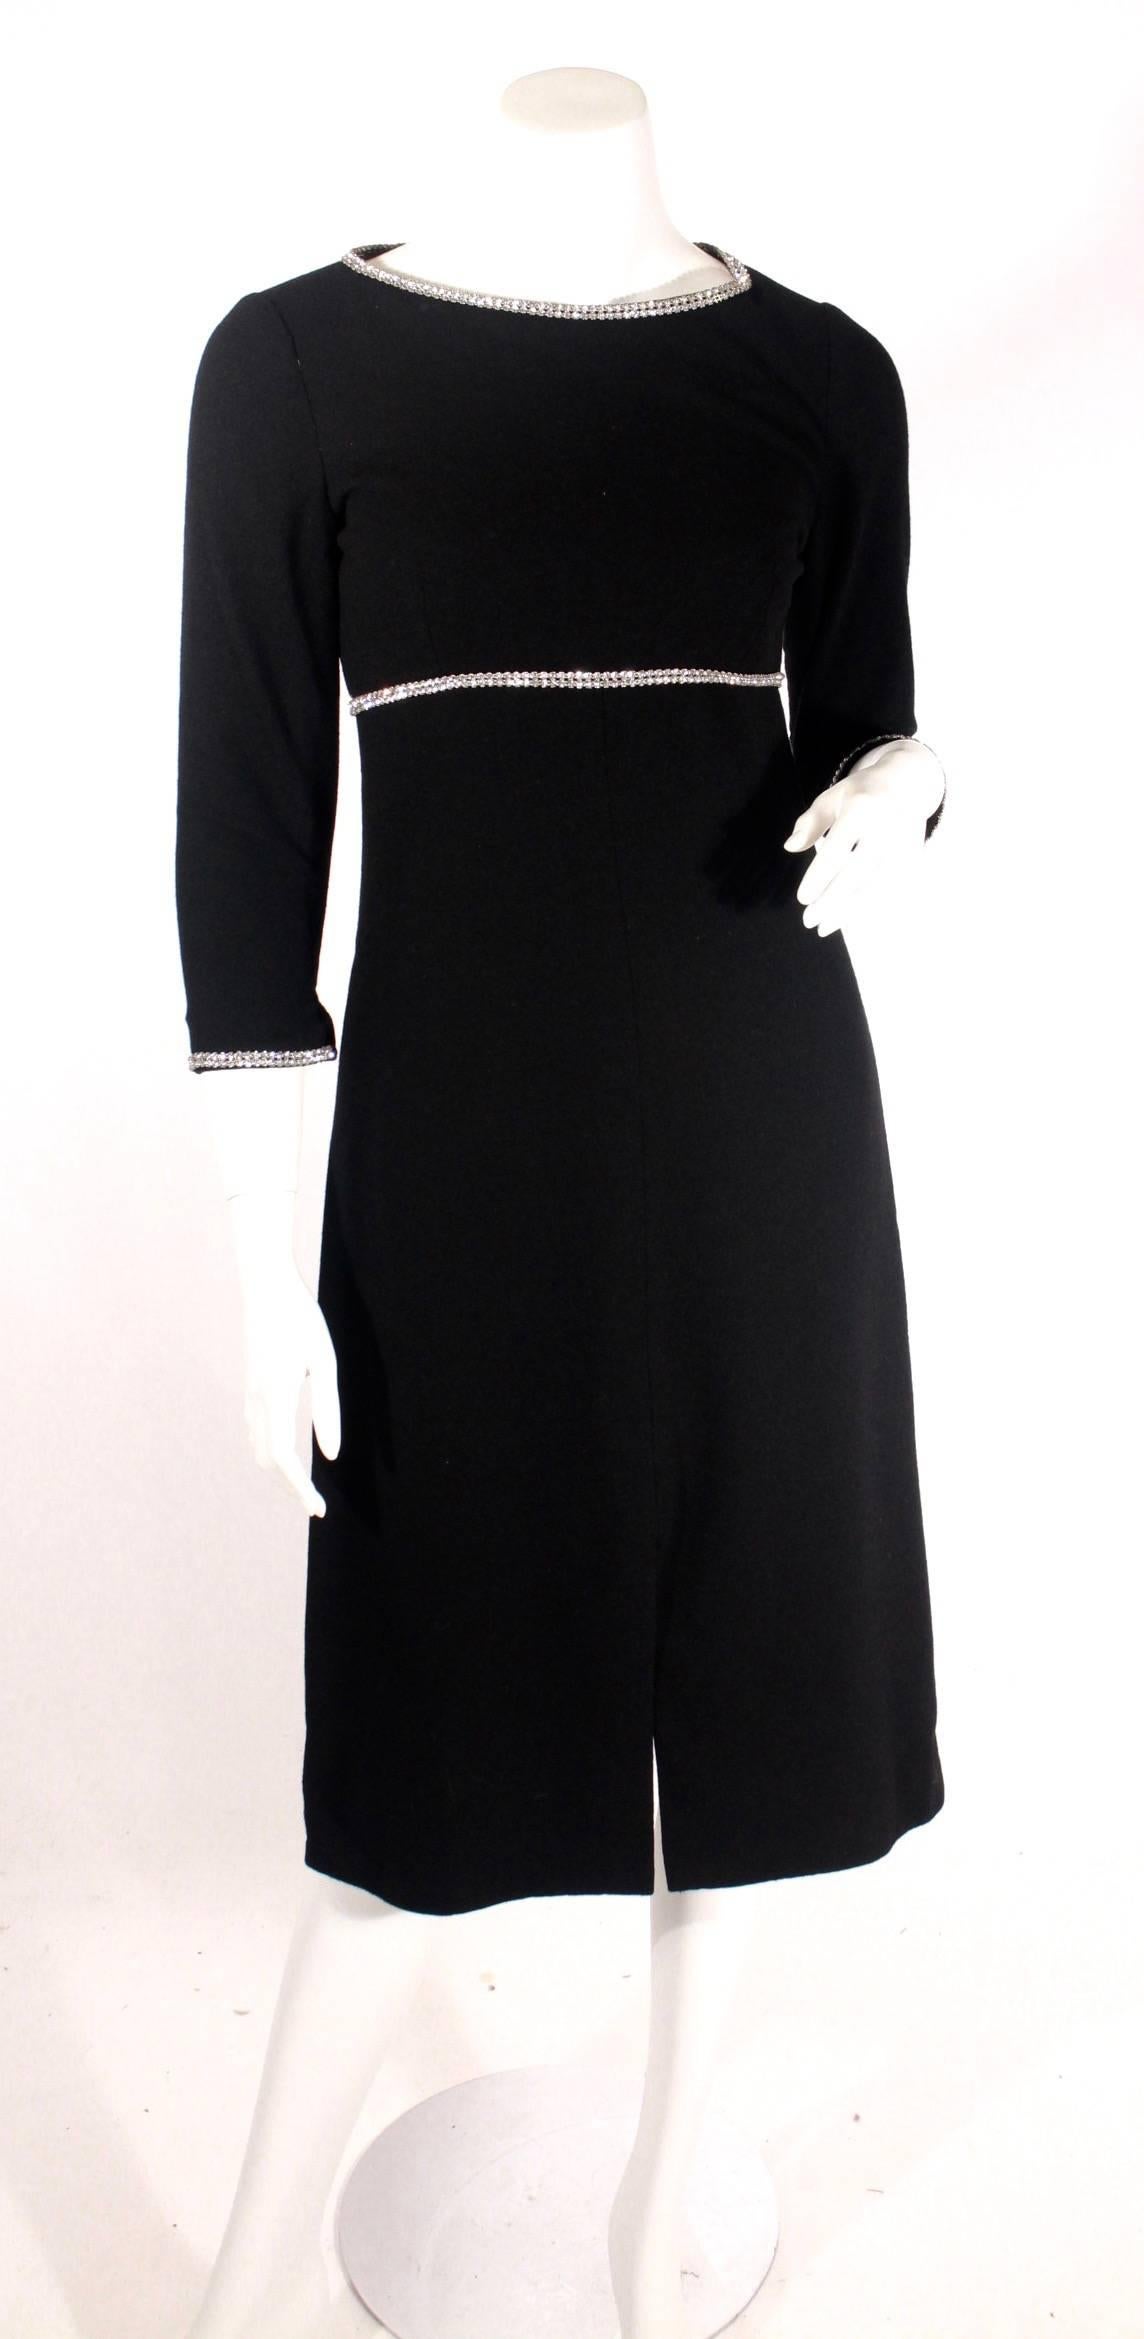 Vintage Norman Norell black wool crepe evening dress. This dress features an empire waist, rhinestone trim around the neckline and waist. Excellent condition. 